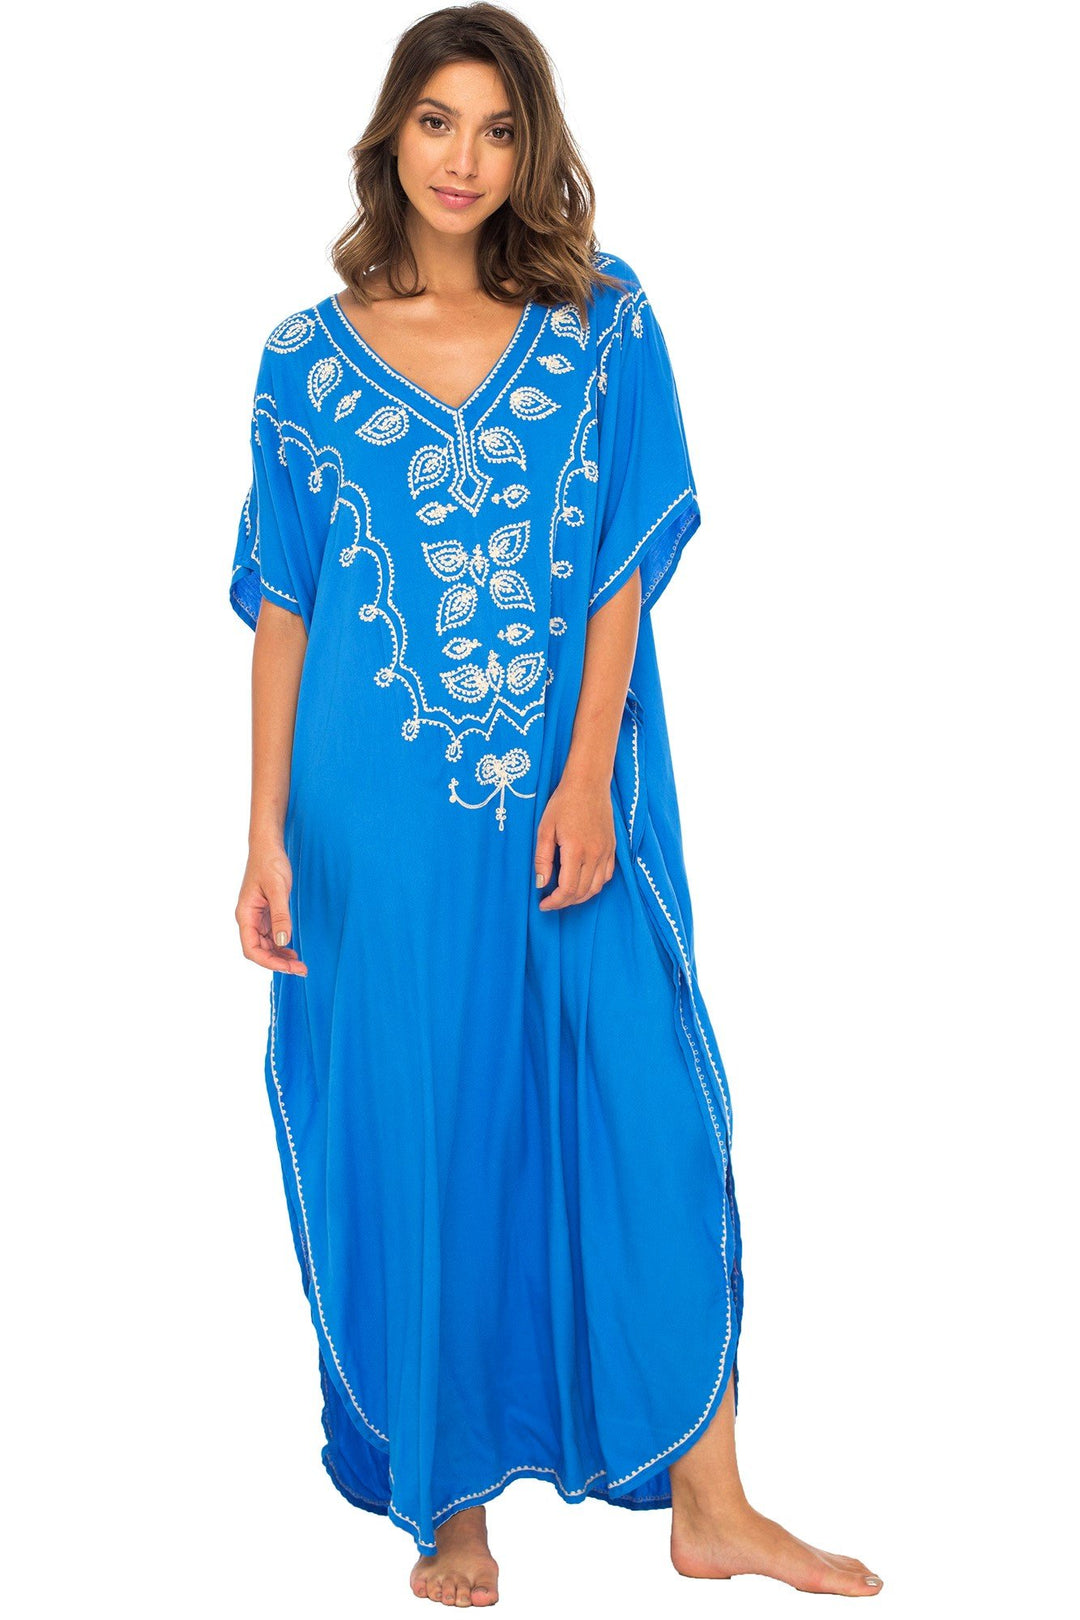 Long Boho Embroidered Dress Caftan Cover Up